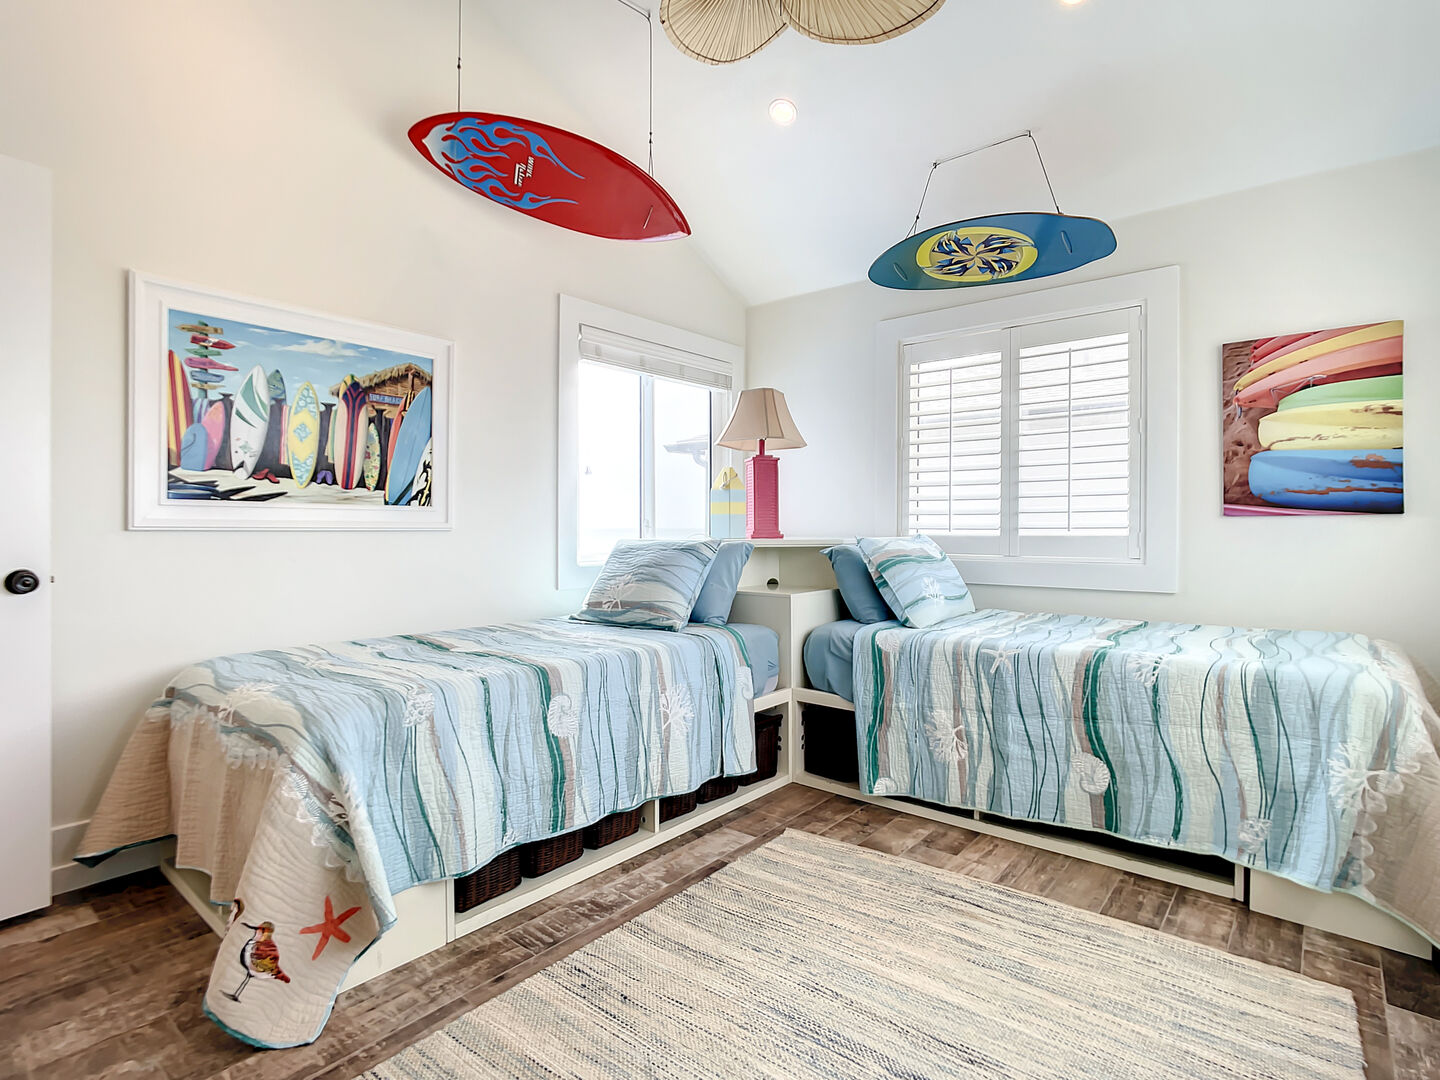 3rd Bedroom with Twin Bed and Surfboard Decorations.